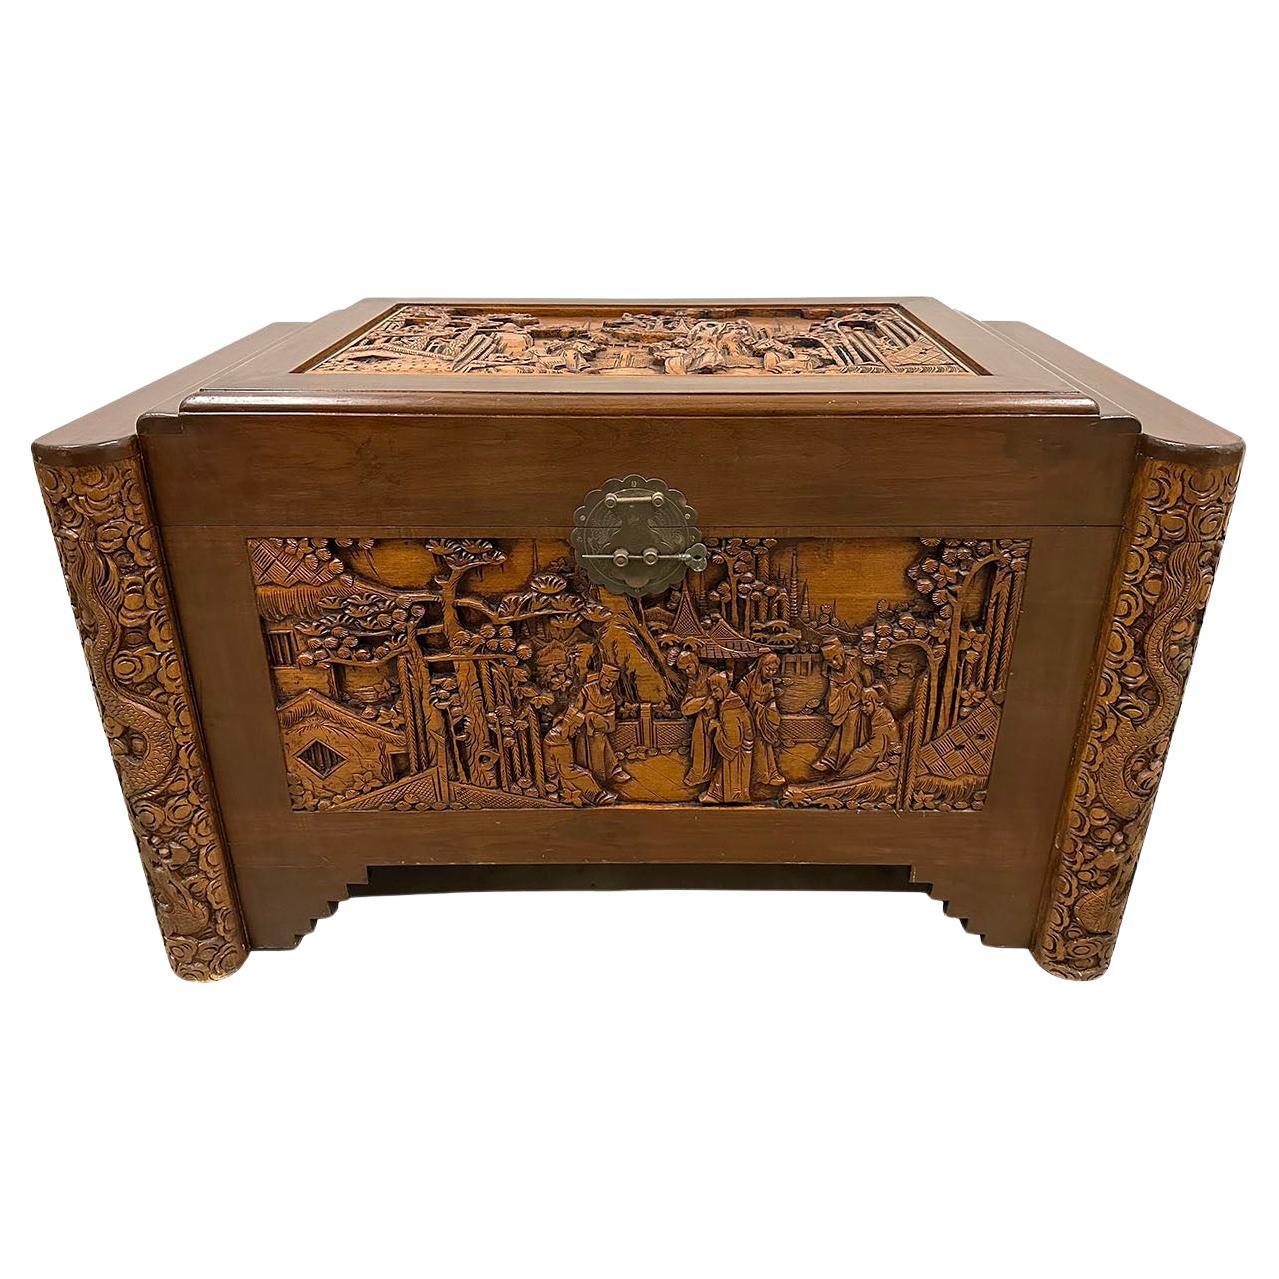 How much is an old cedar chest worth?